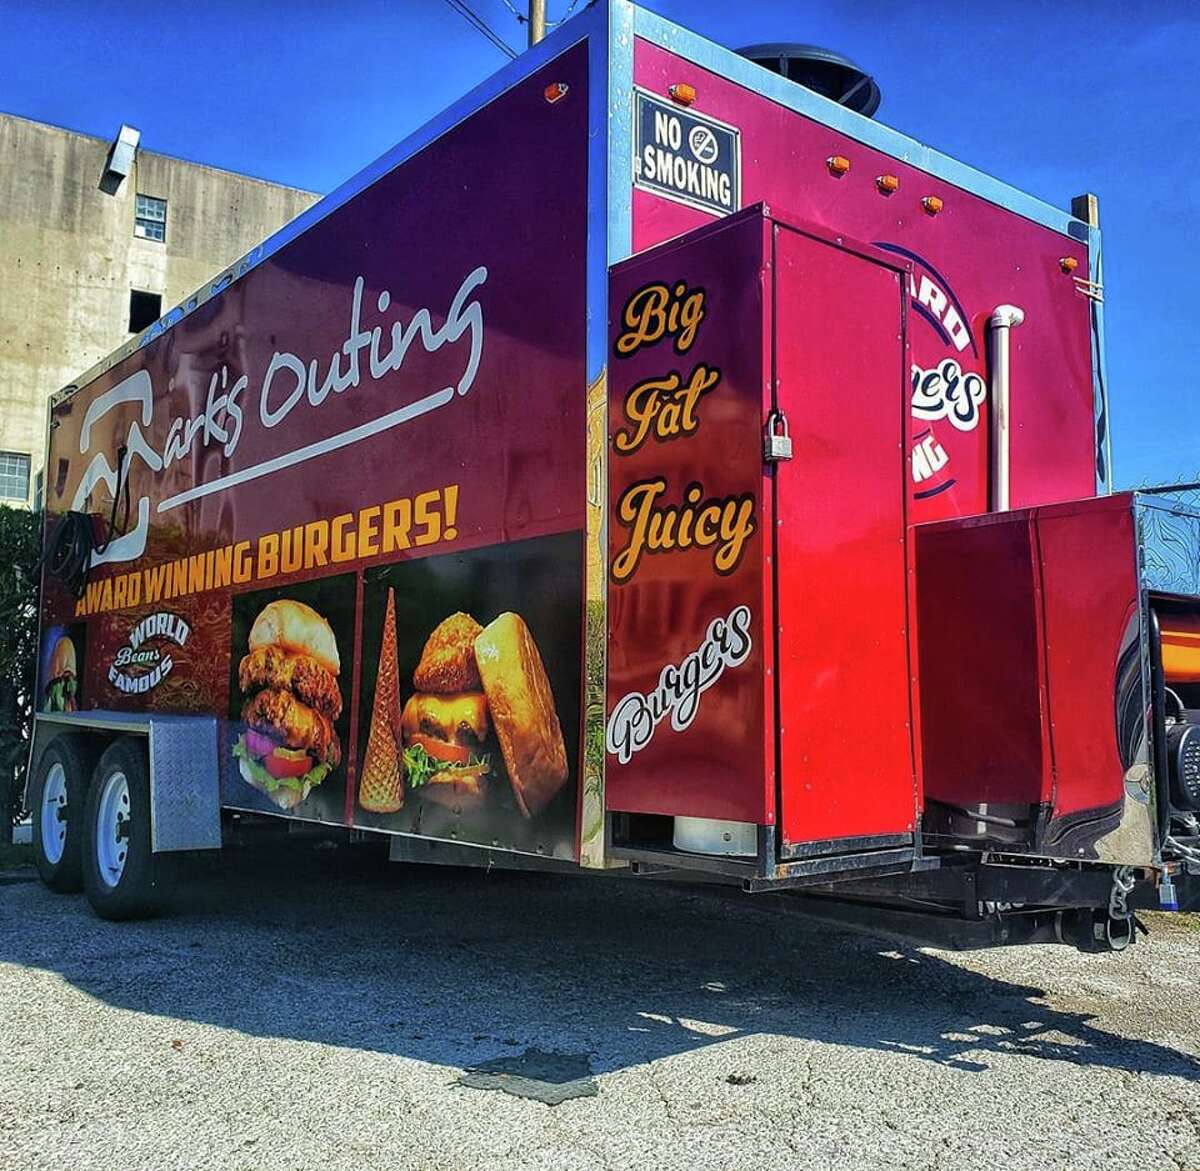 Mark's Outing restaurant is looking to bring its burgers to a corner near you with its new food truck.